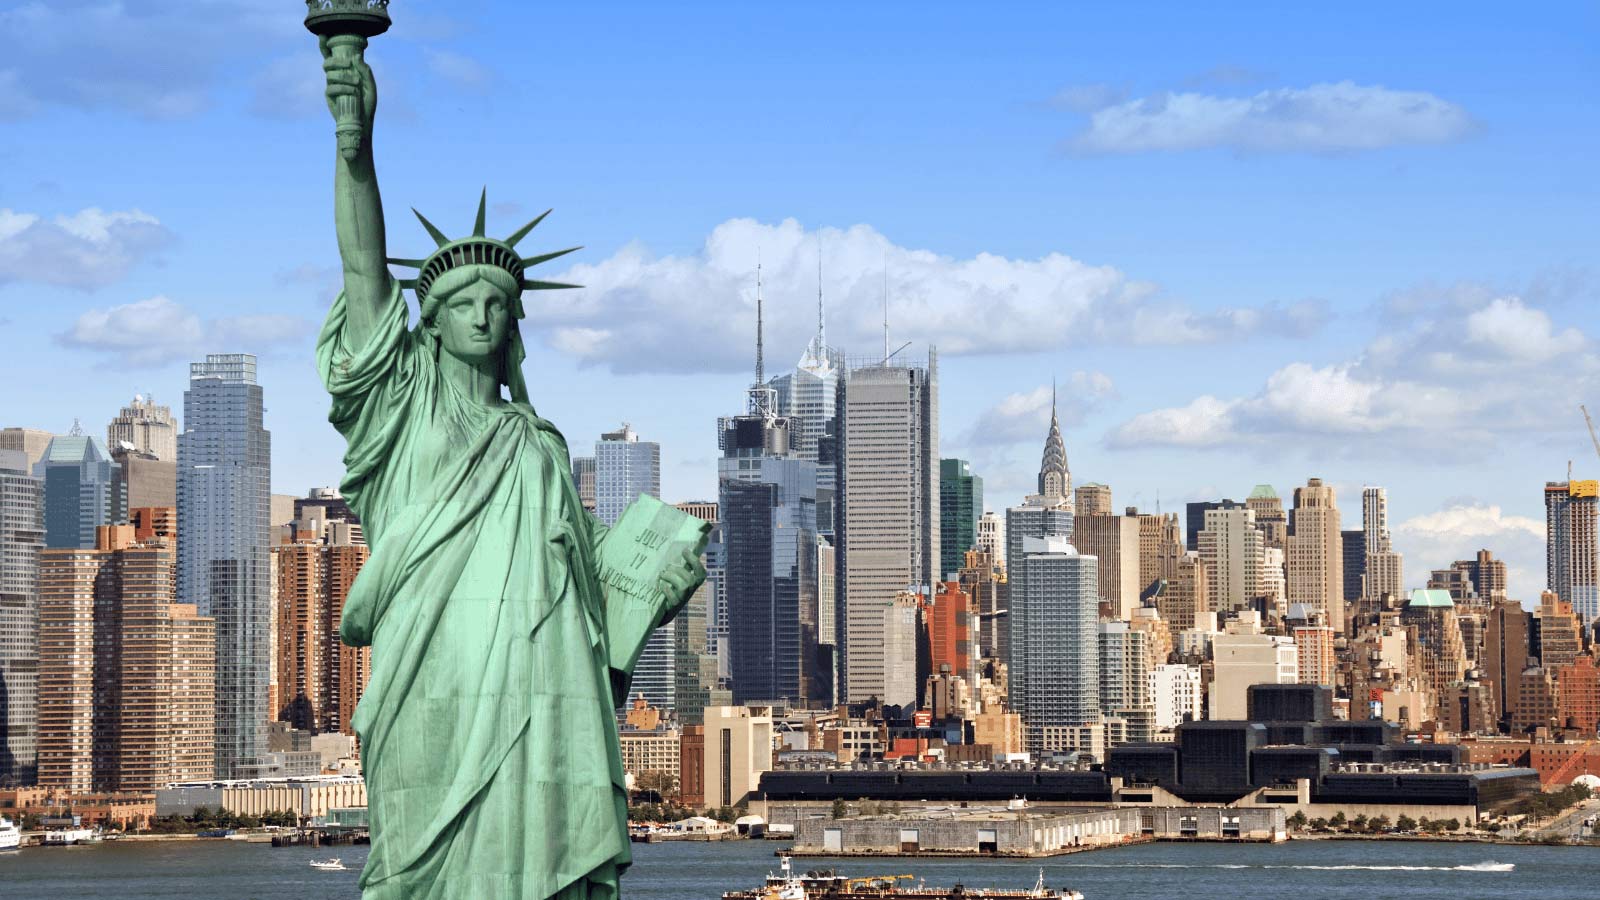 <p>The Statue of Liberty is known as a symbol of freedom and opportunity. It’s located on Liberty Island in New York Harbor and was a gift from France in 1886. Visitors can take a ferry to Liberty Island and climb to the top of the statue for a breathtaking view of the city.</p>